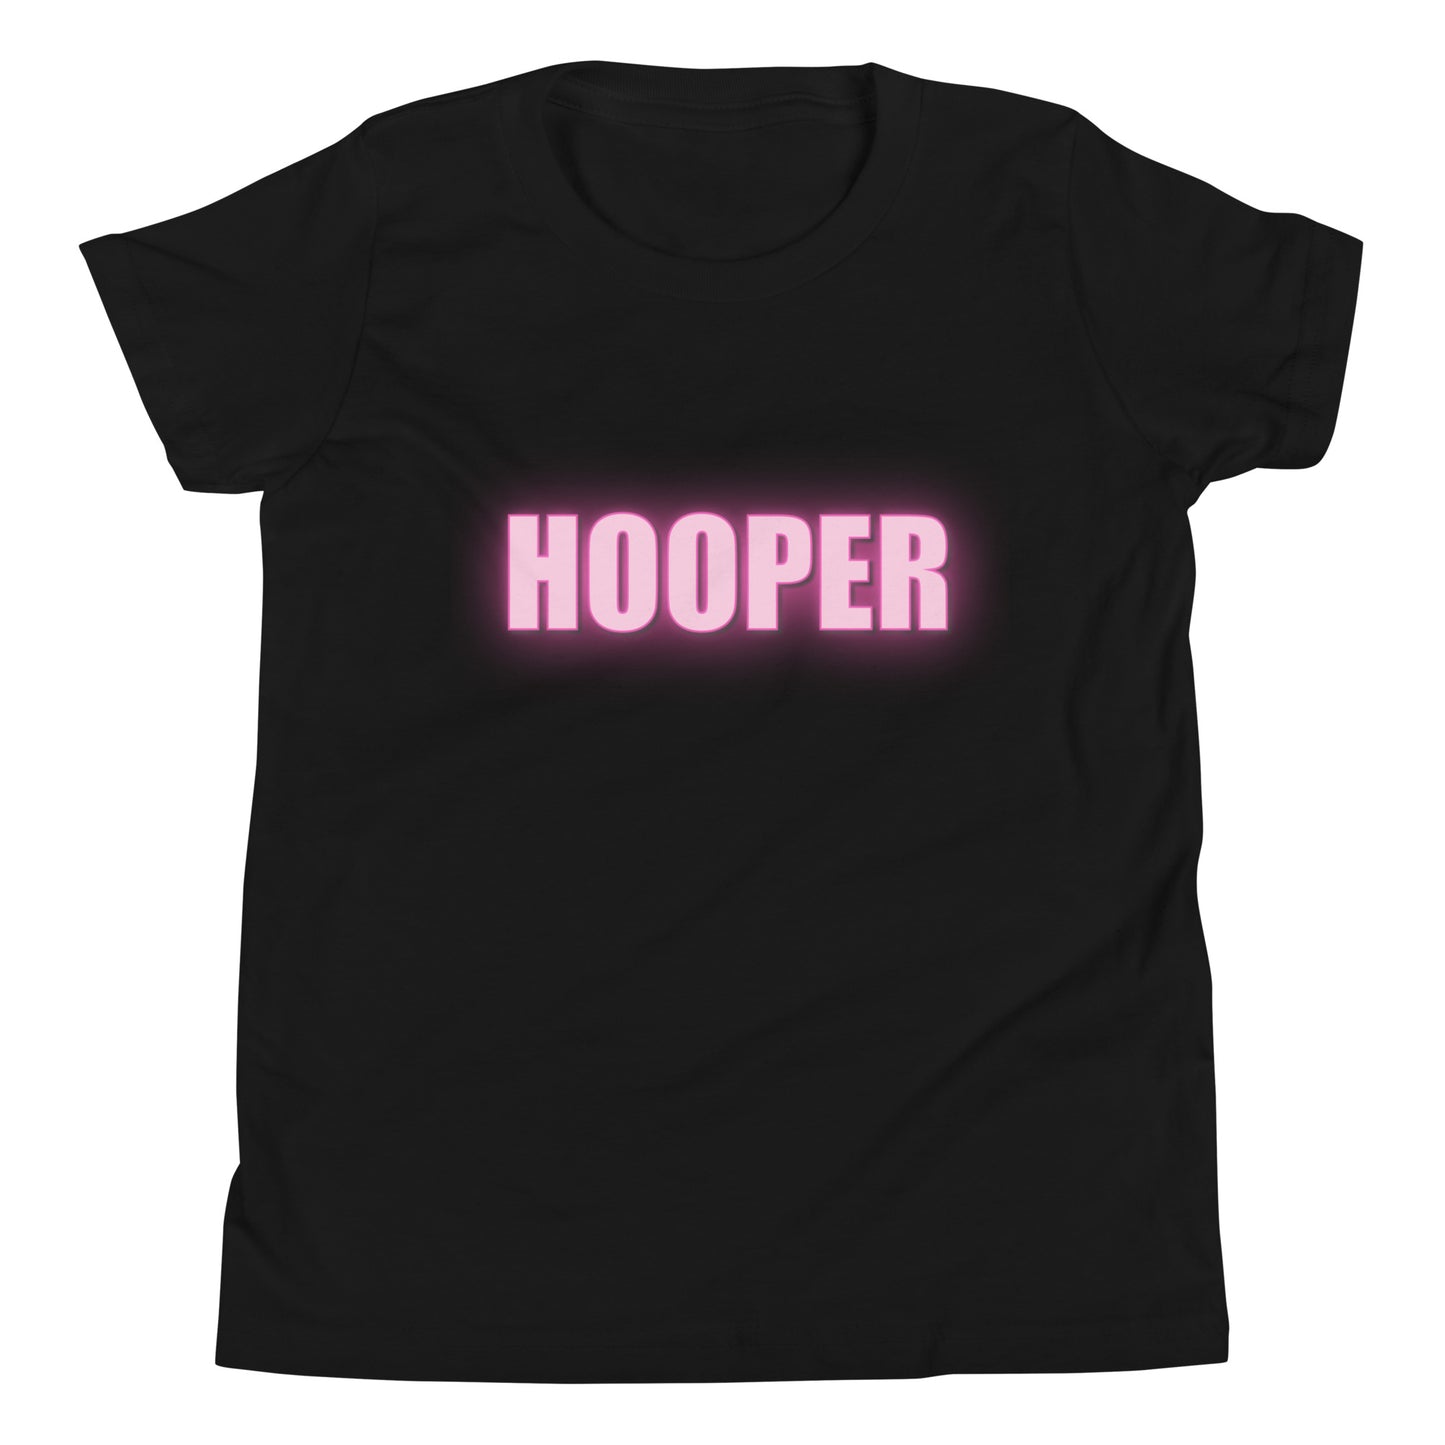 Pink Hooper Youth Short Sleeve T-Shirt - Perfect Fit for Boys and Girls